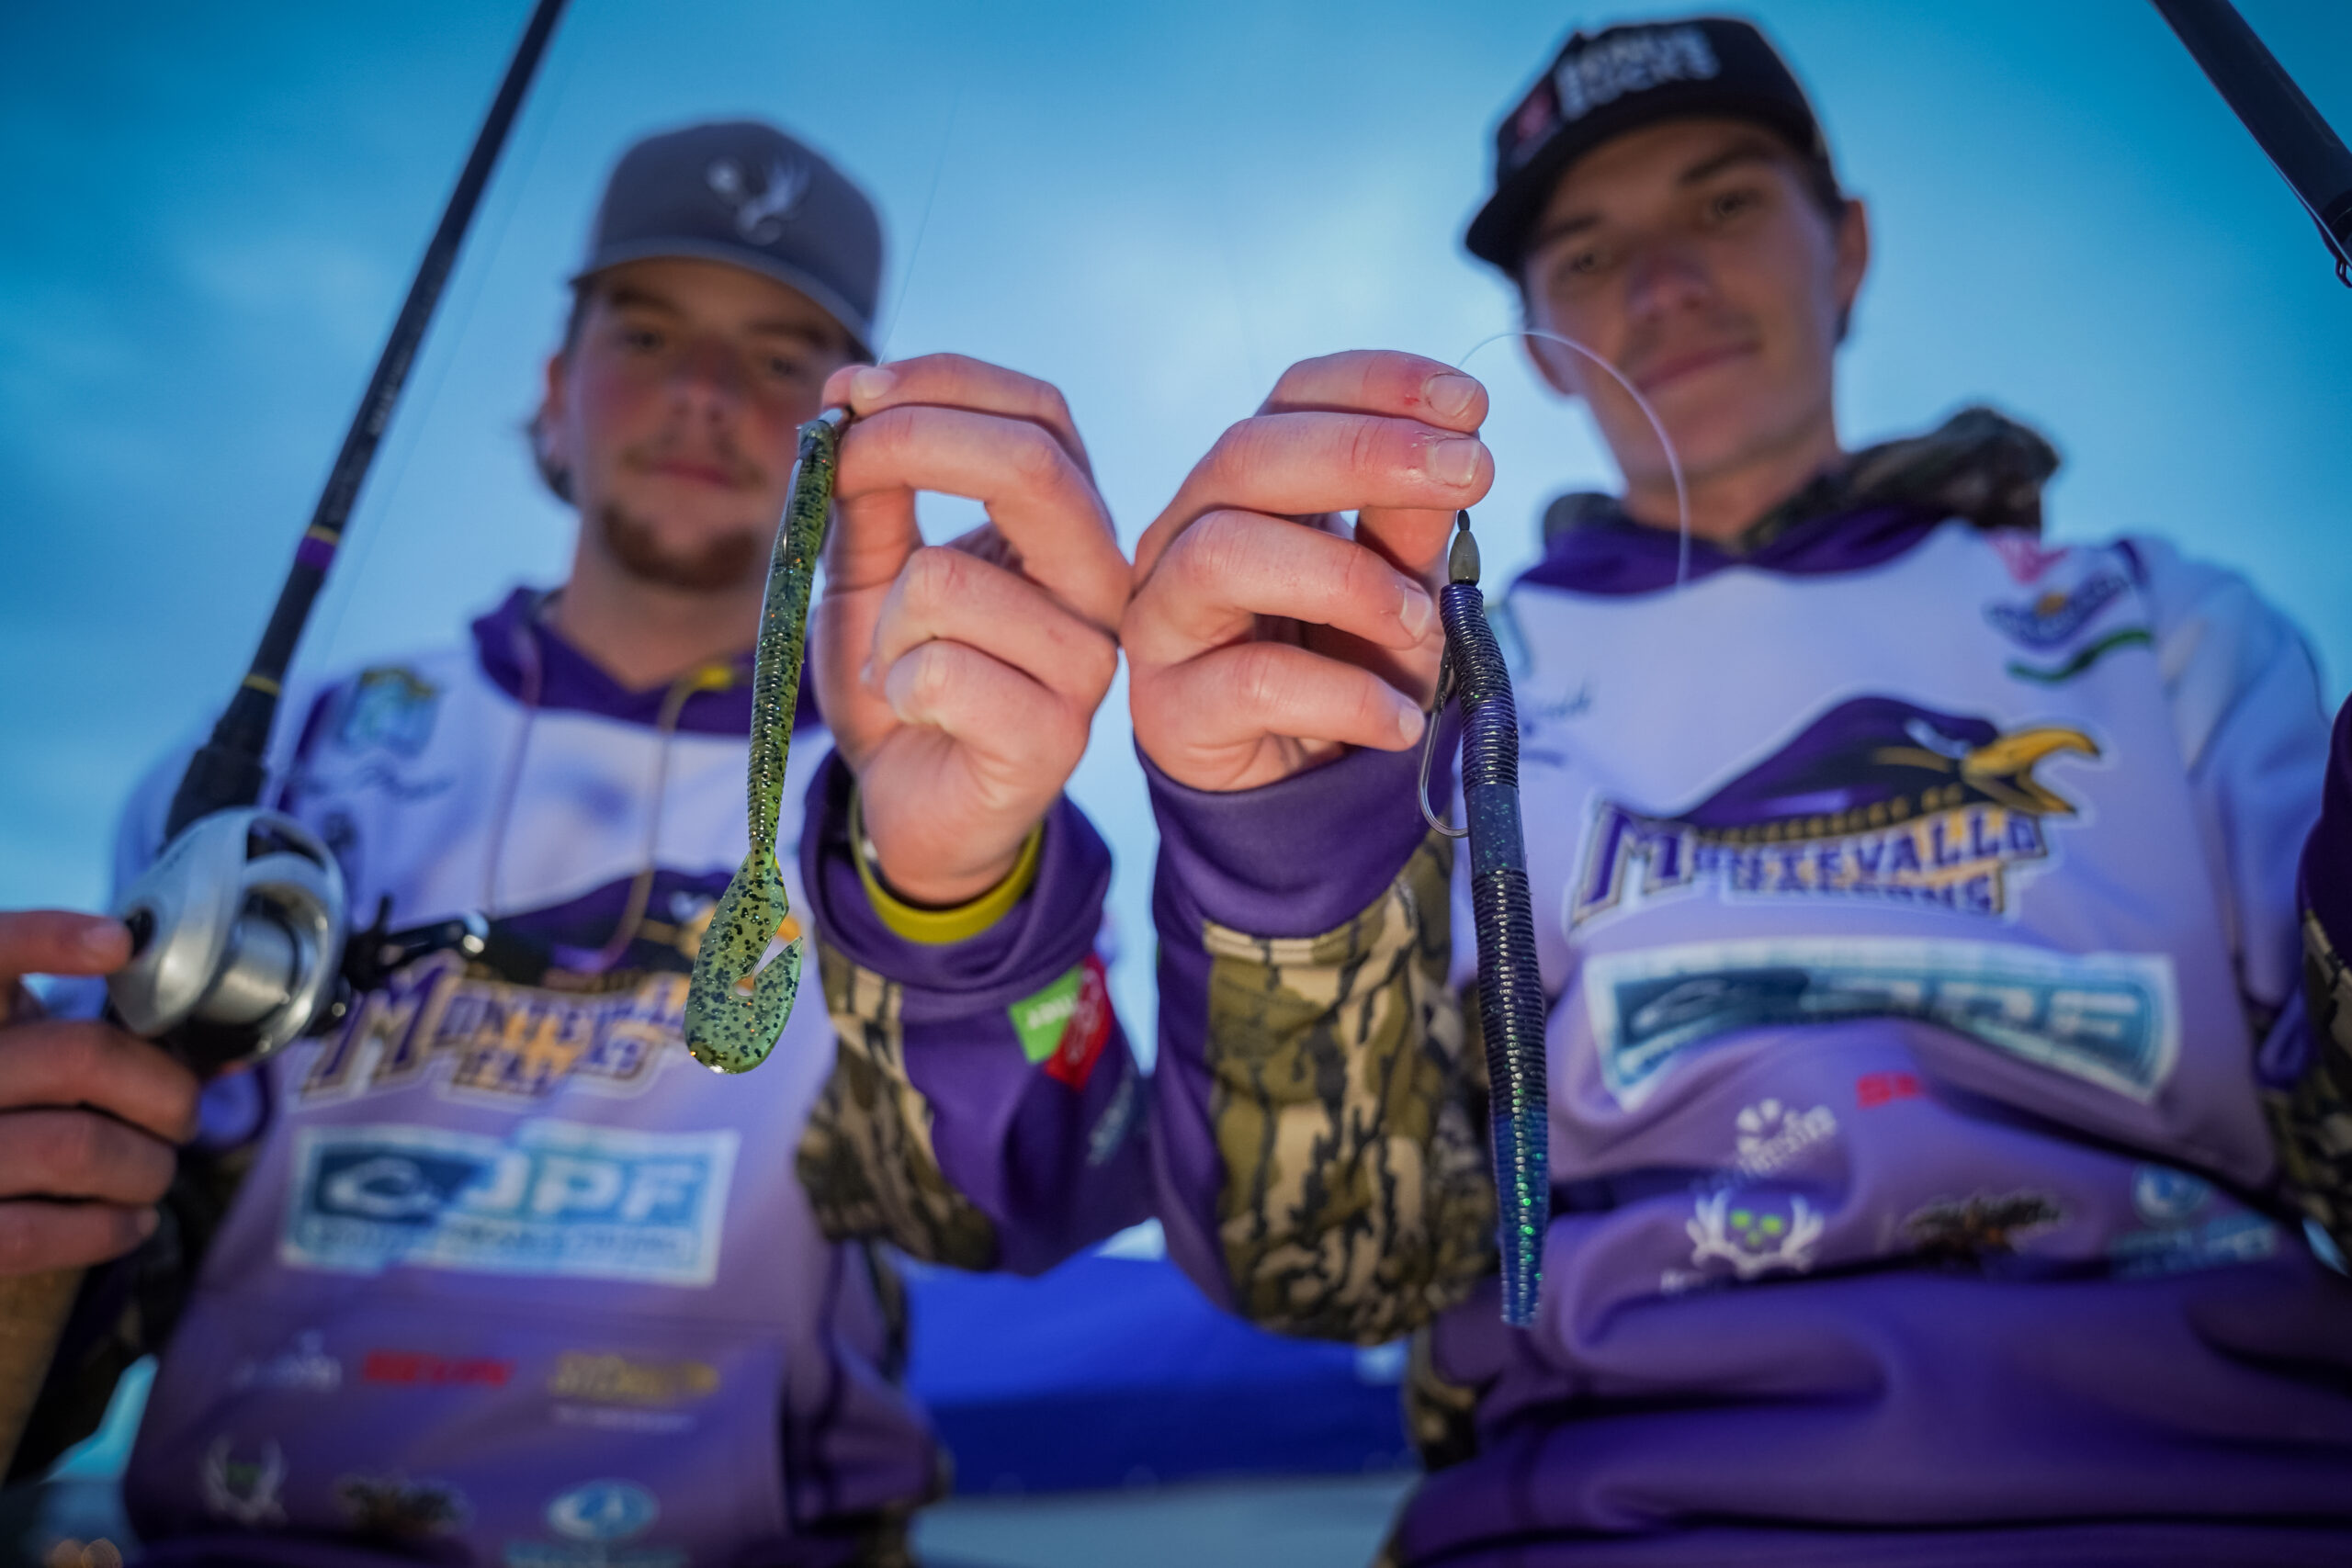 Two Lipan High School fishing teams advance to state competition